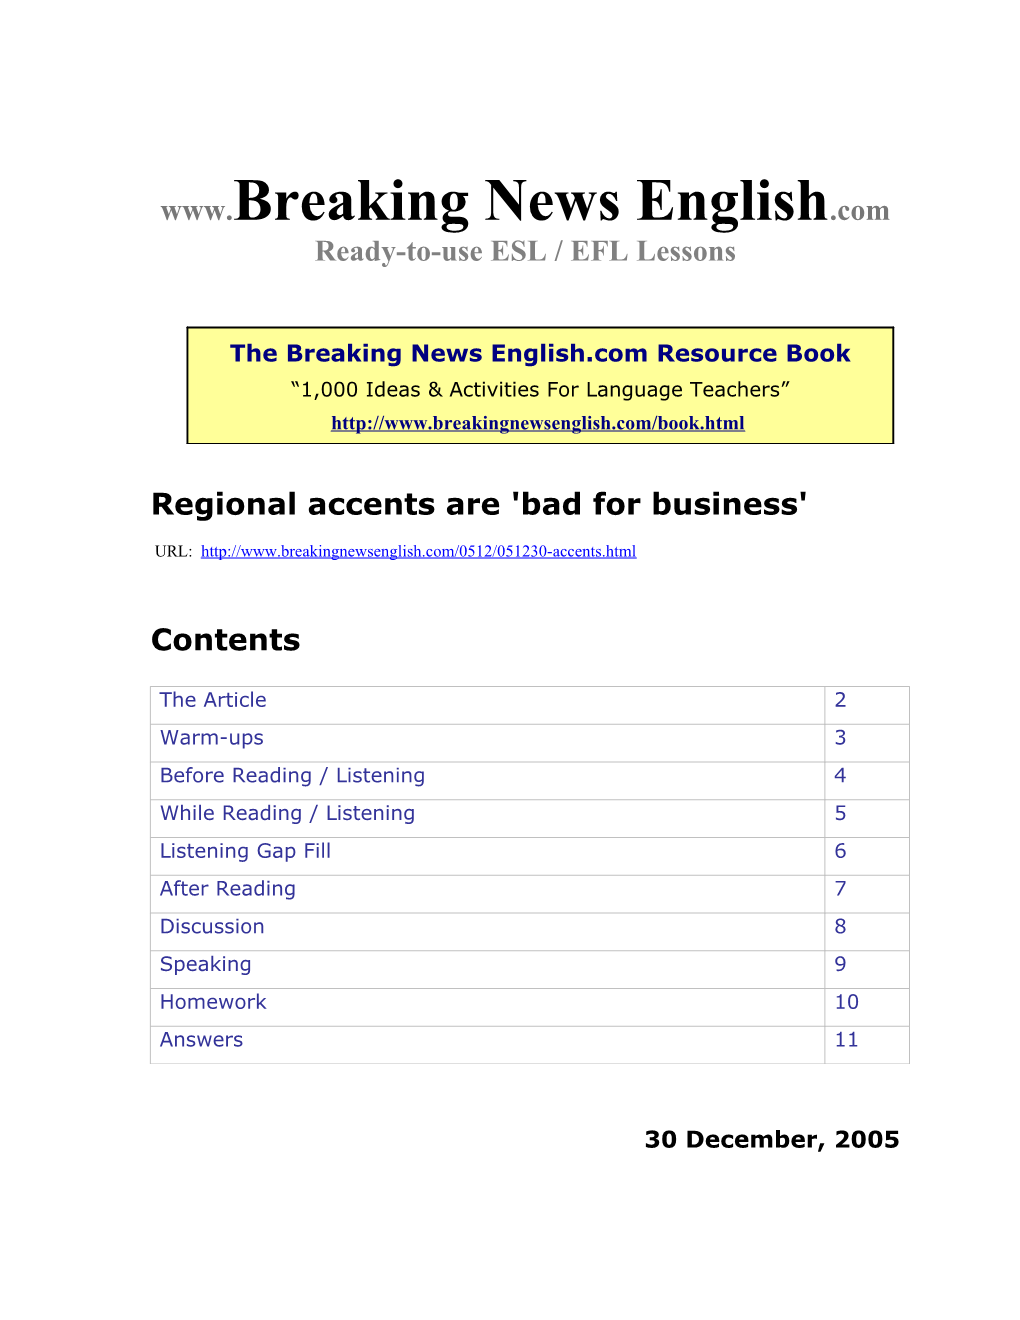 Regional Accents Are 'Bad for Business'